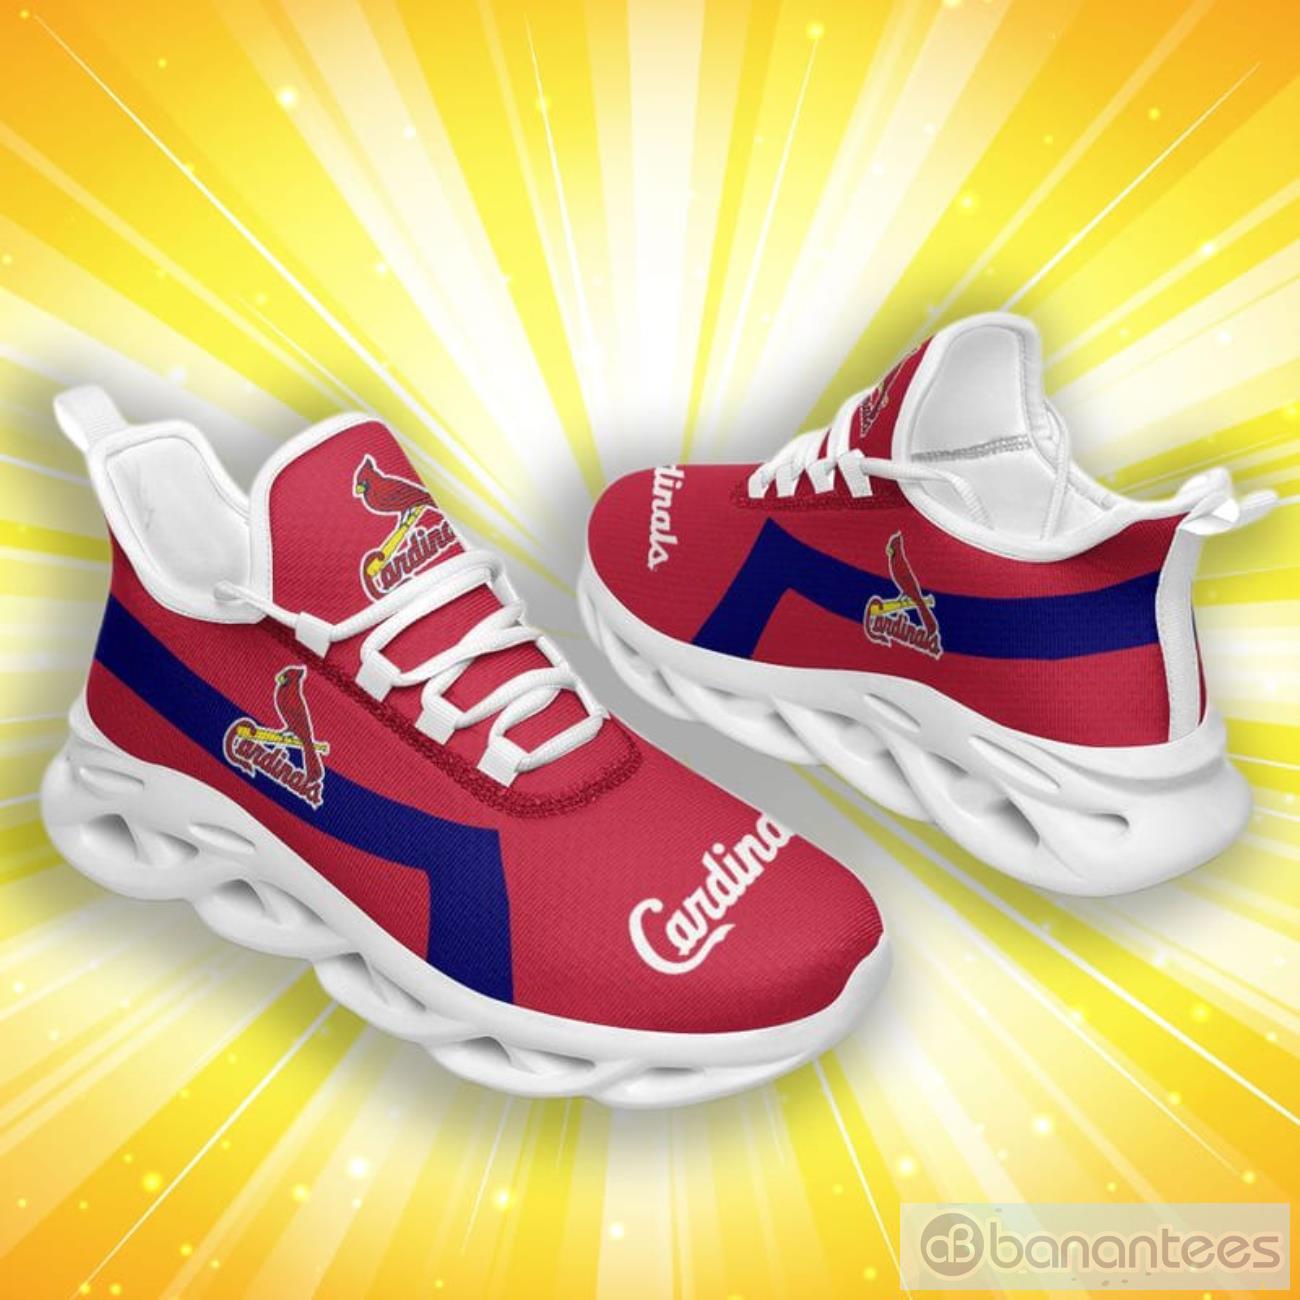 St. Louis Cardinals Classic Pattern Max Soul Shoes Limited Edition